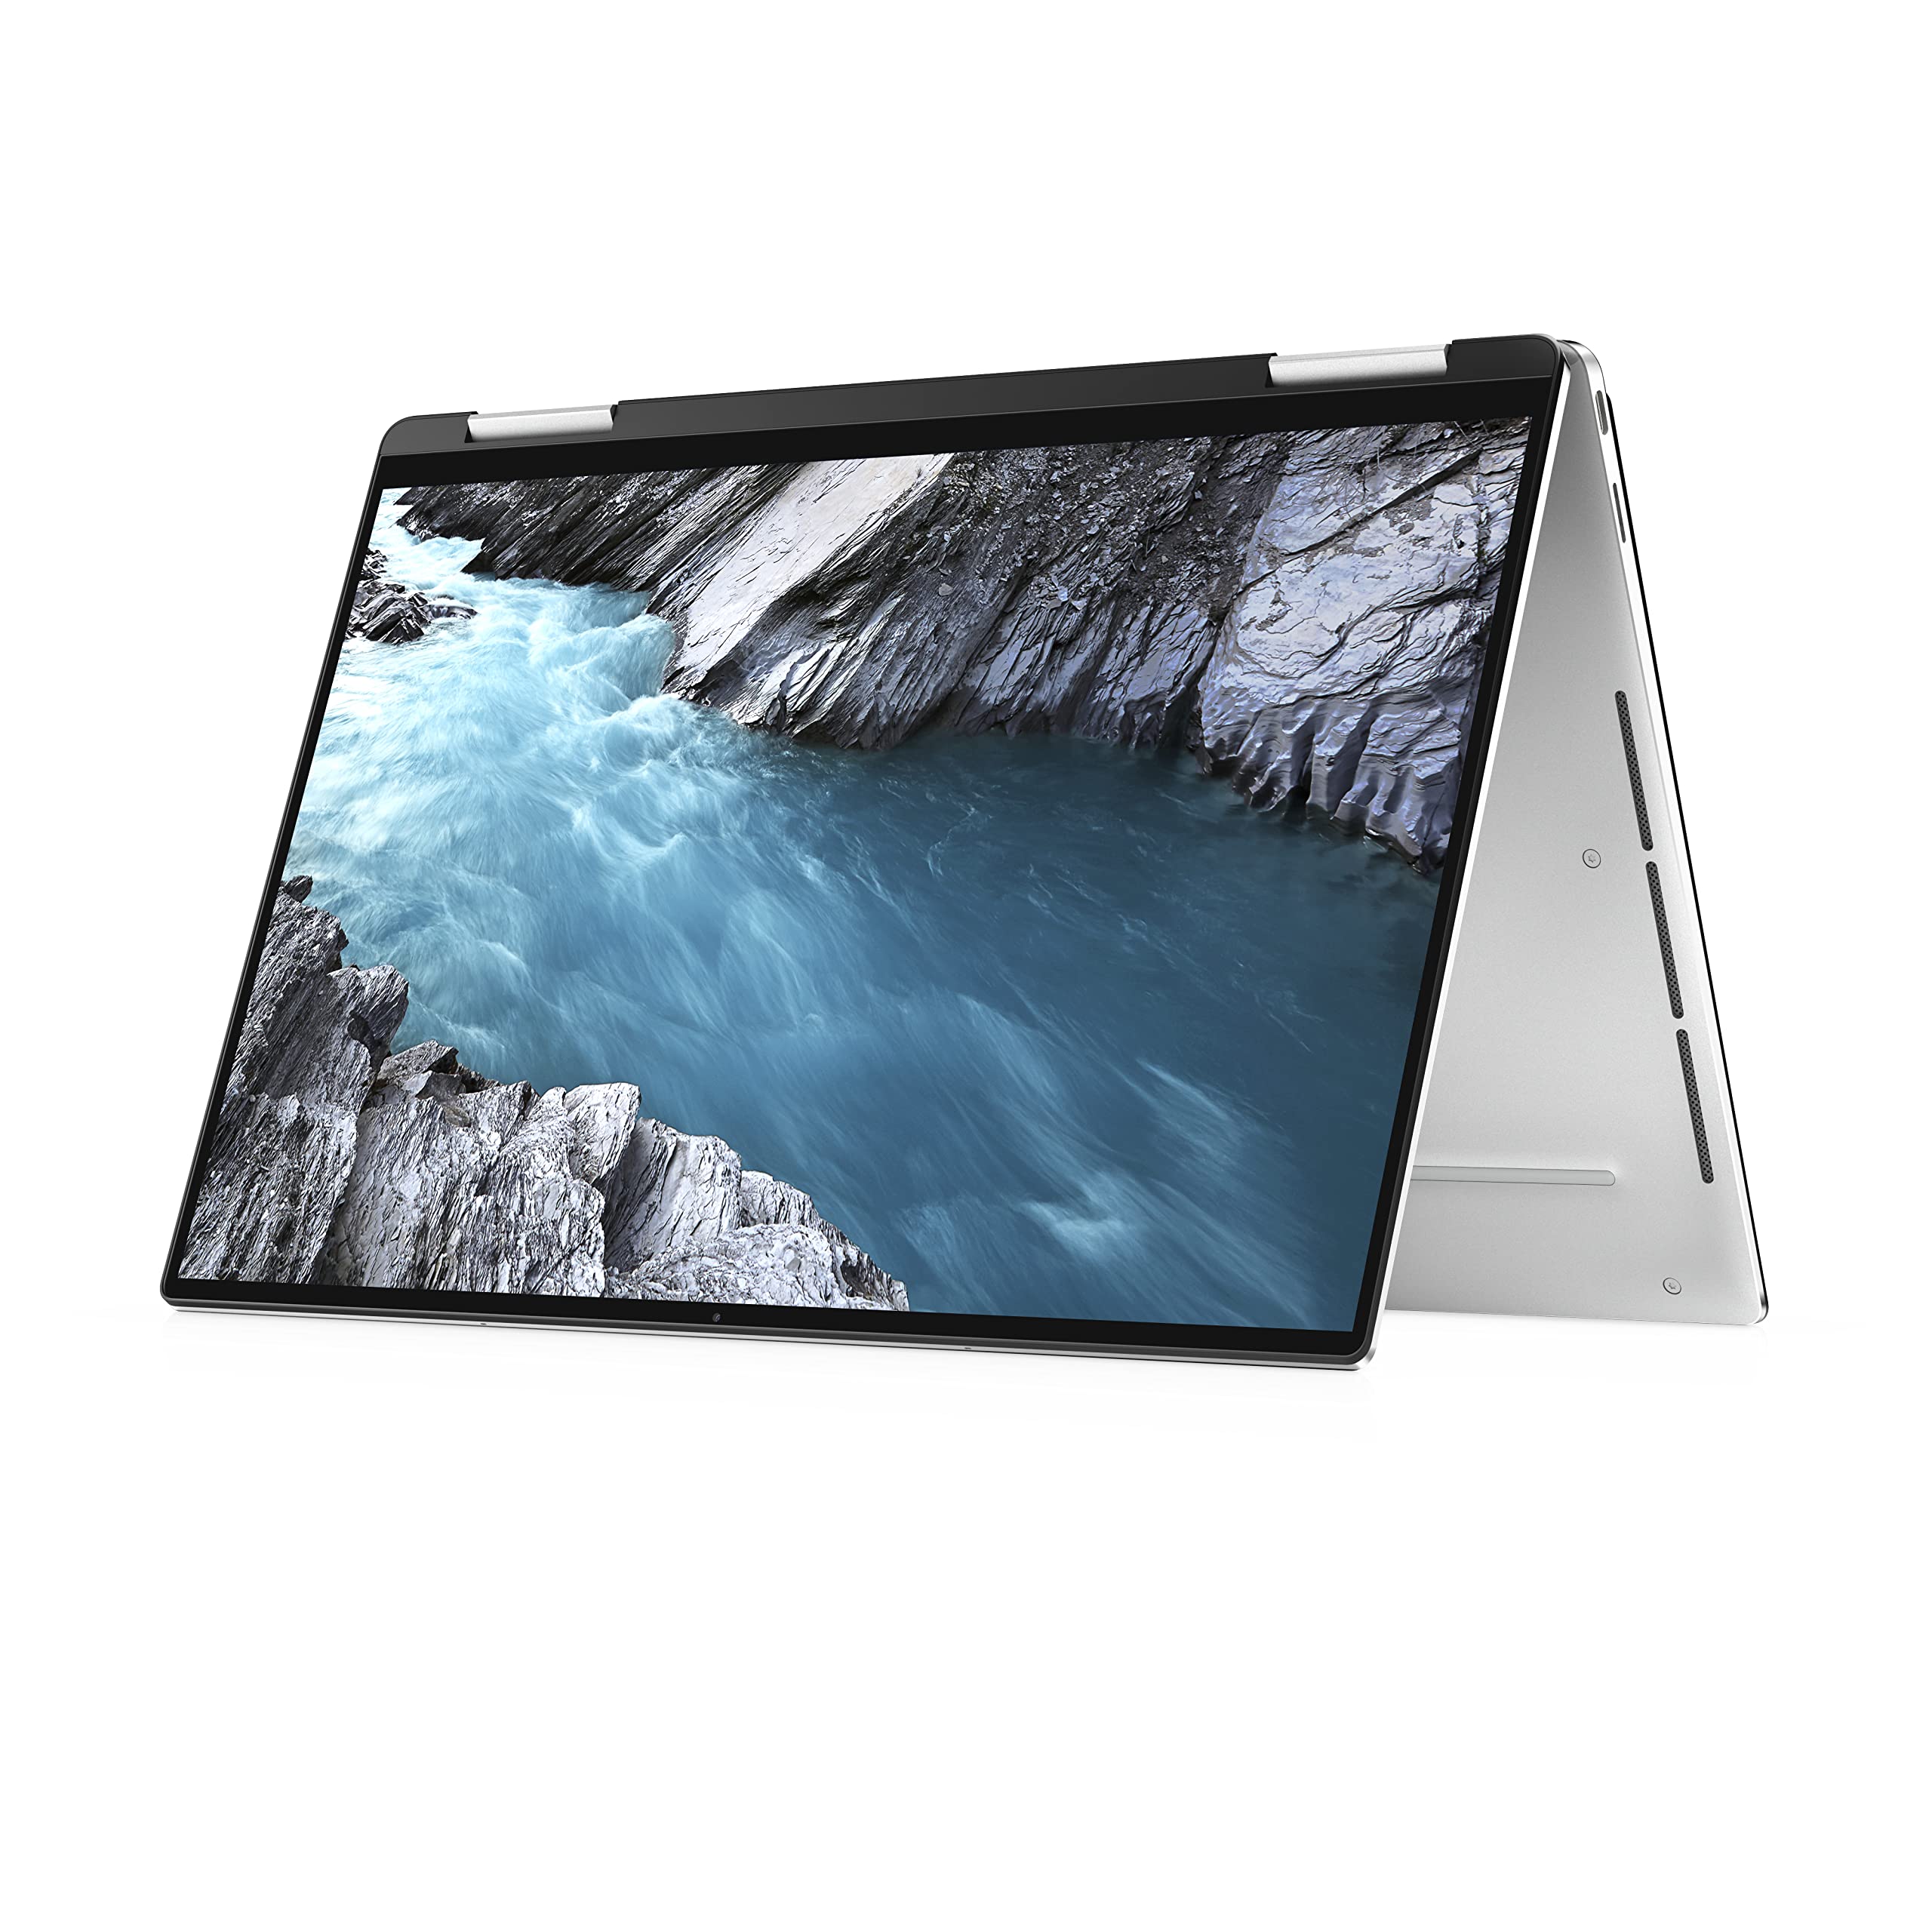 Dell XPS13 7390 2 in 1 UHD 英語キーボード - PC/タブレット